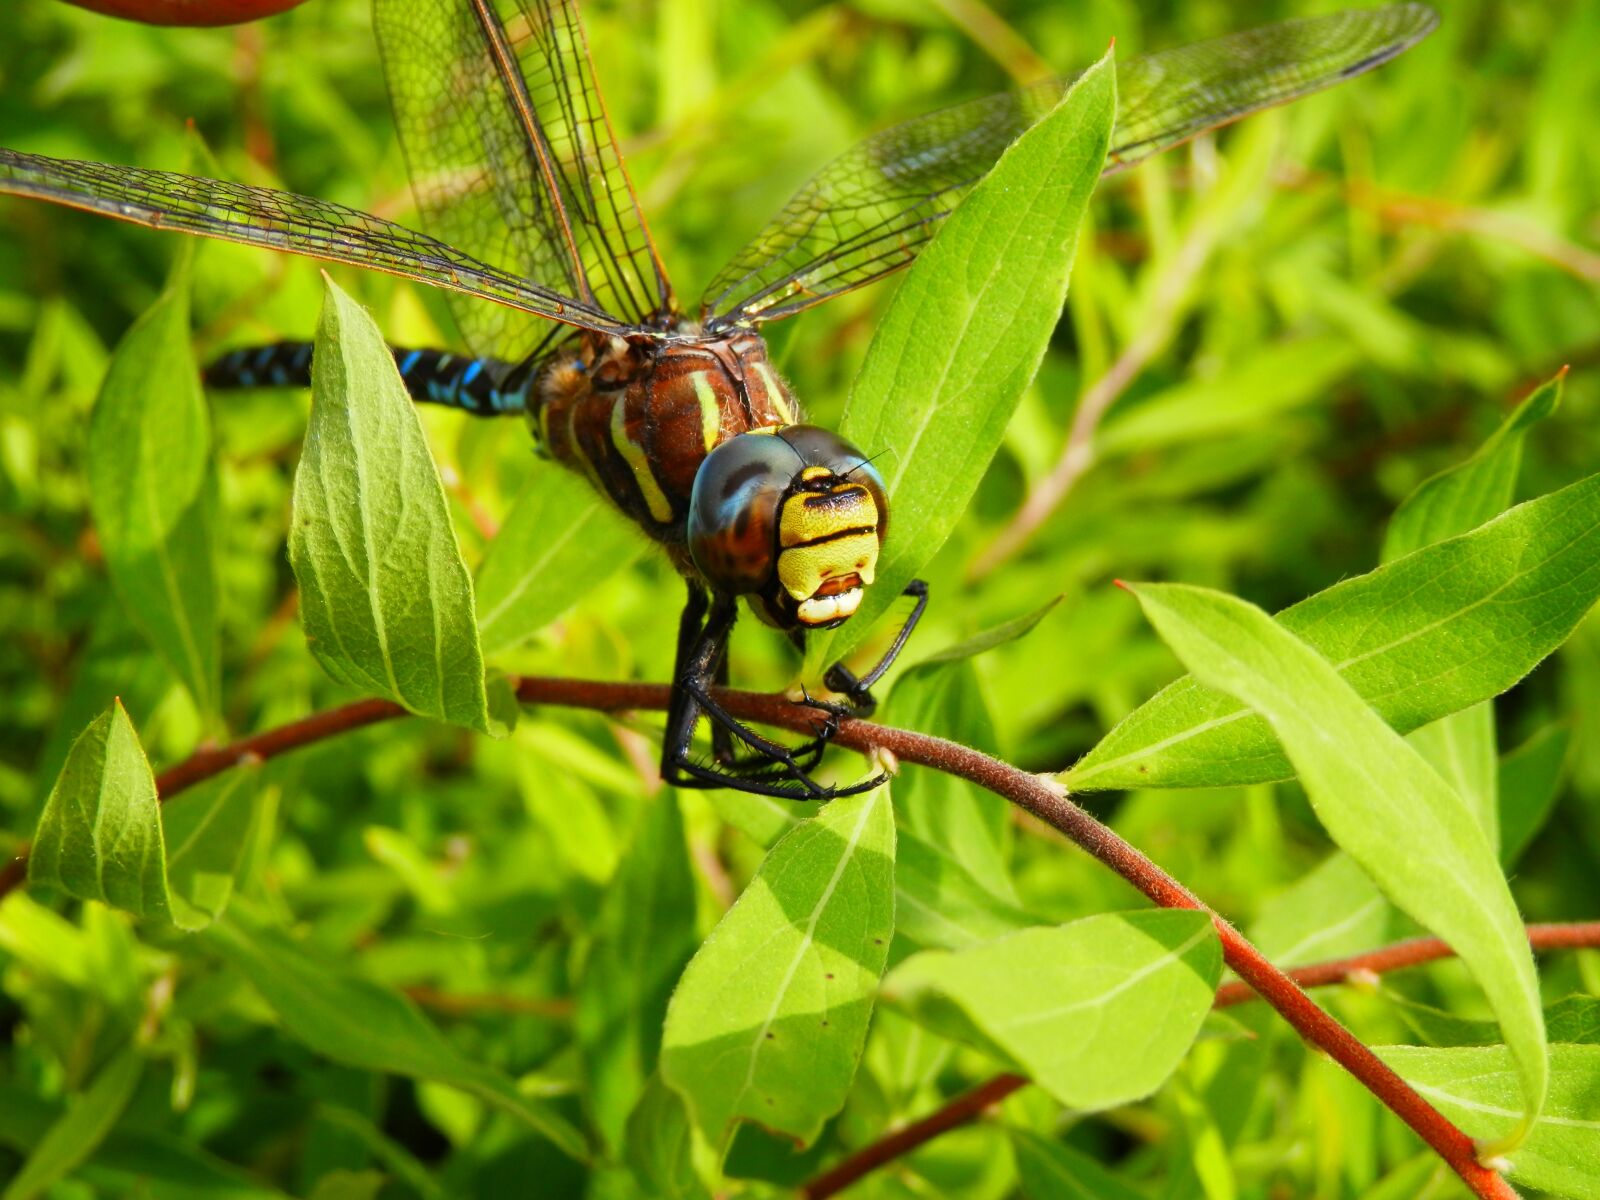 Olympus SZ-11 sample photo. Dragonfly, outside, nature photography